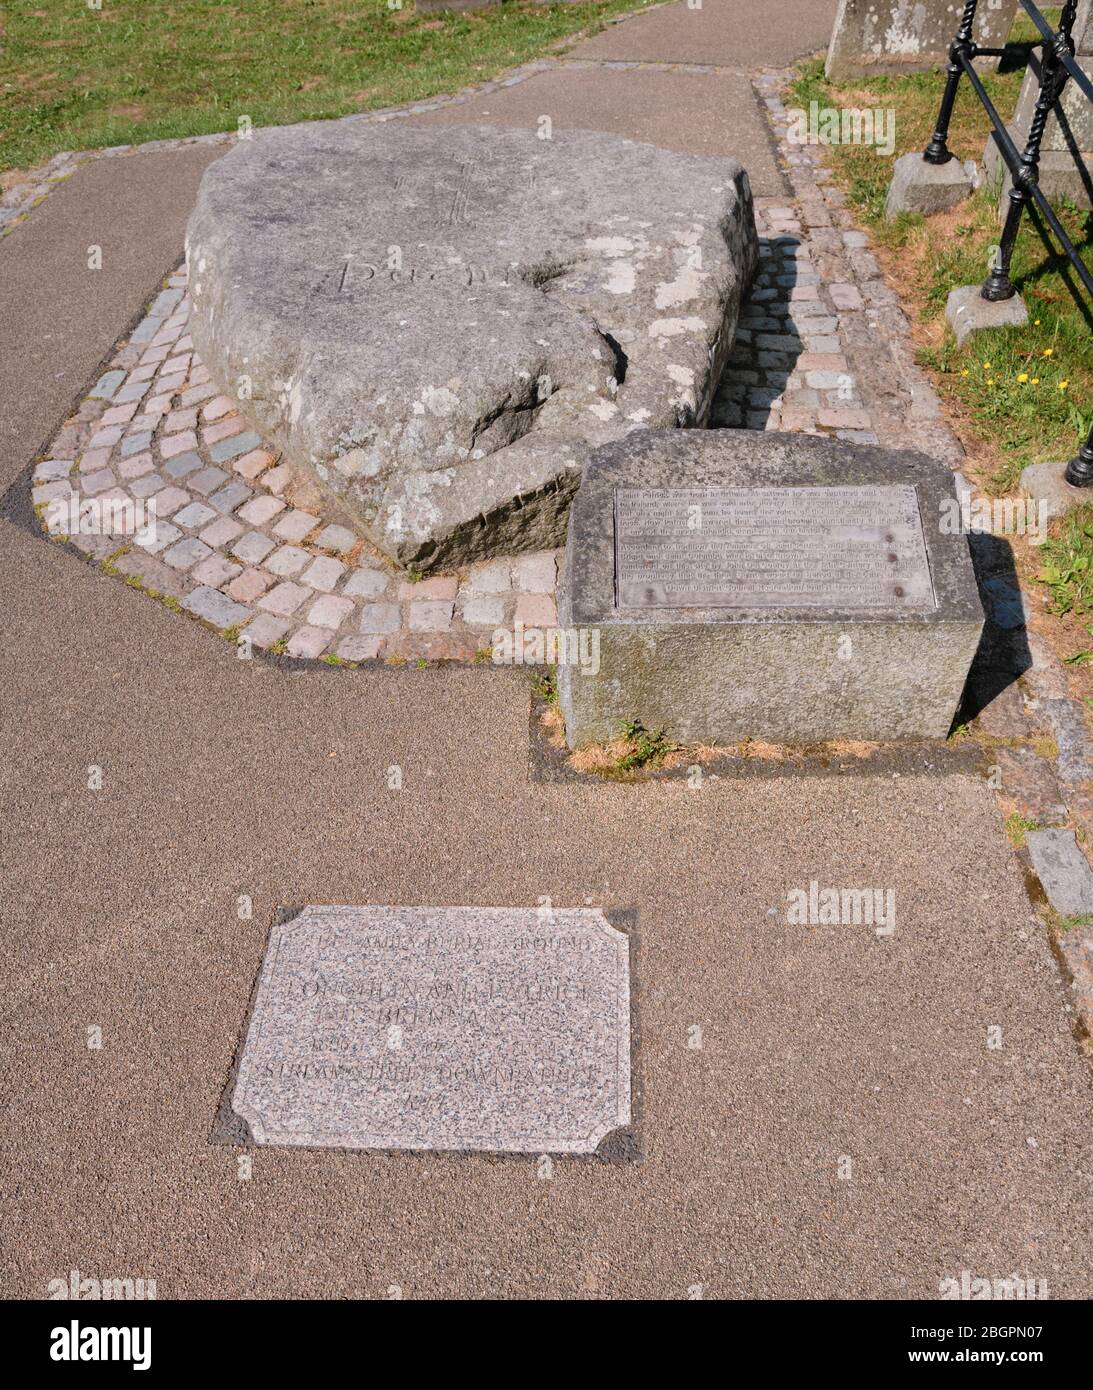 Ireland, County Down, Downpatrick, Mourne granite slab marking the traditional burial place of St Patrick at the Cathedral Church of the Holy Trinity also known as Down Cathedral. Stock Photo